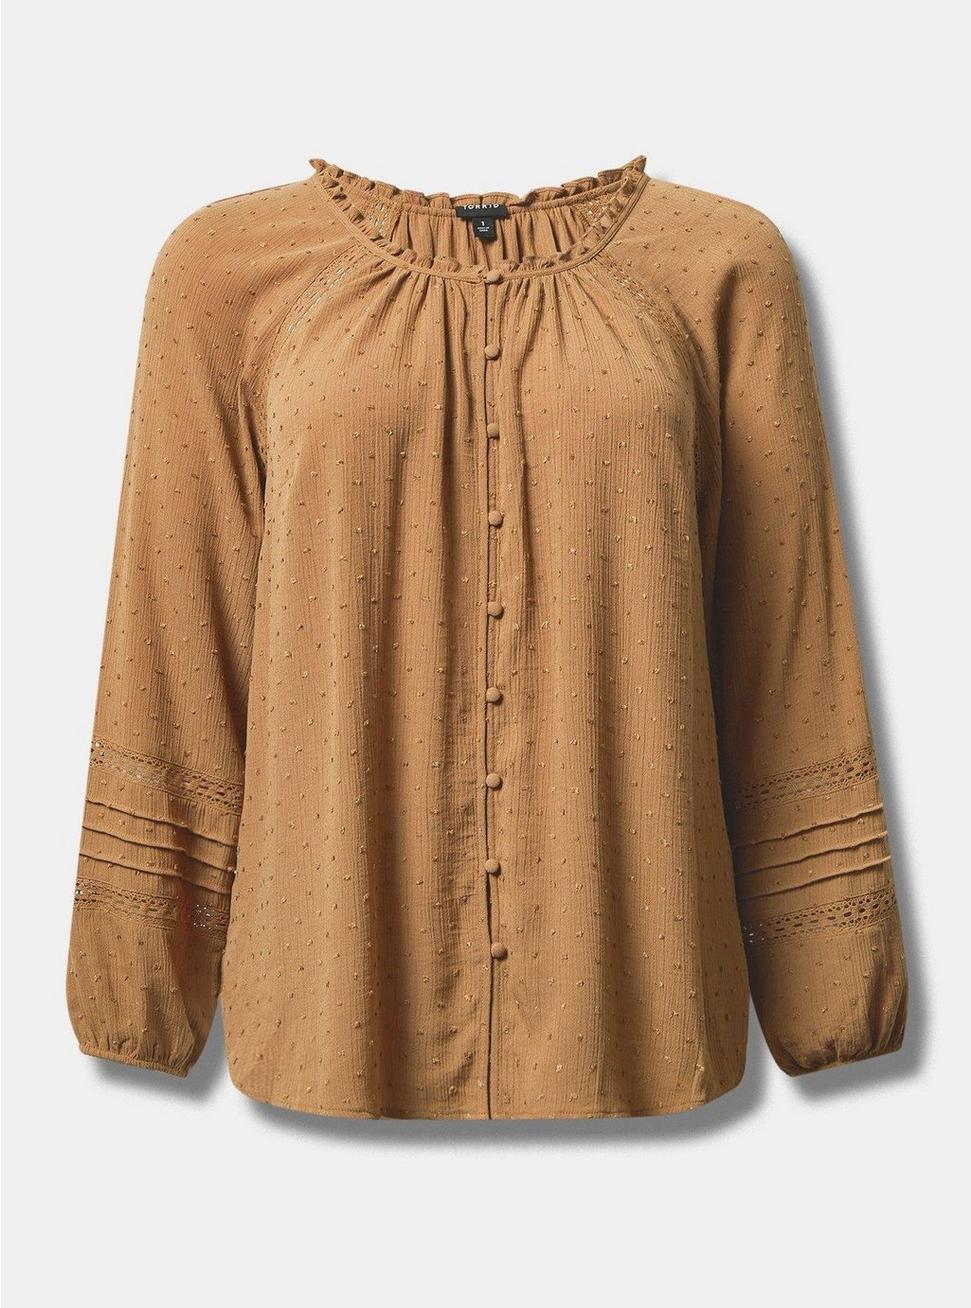 Washable Gauze Lace Inset Top, TOBACCO BROWN, hi-res